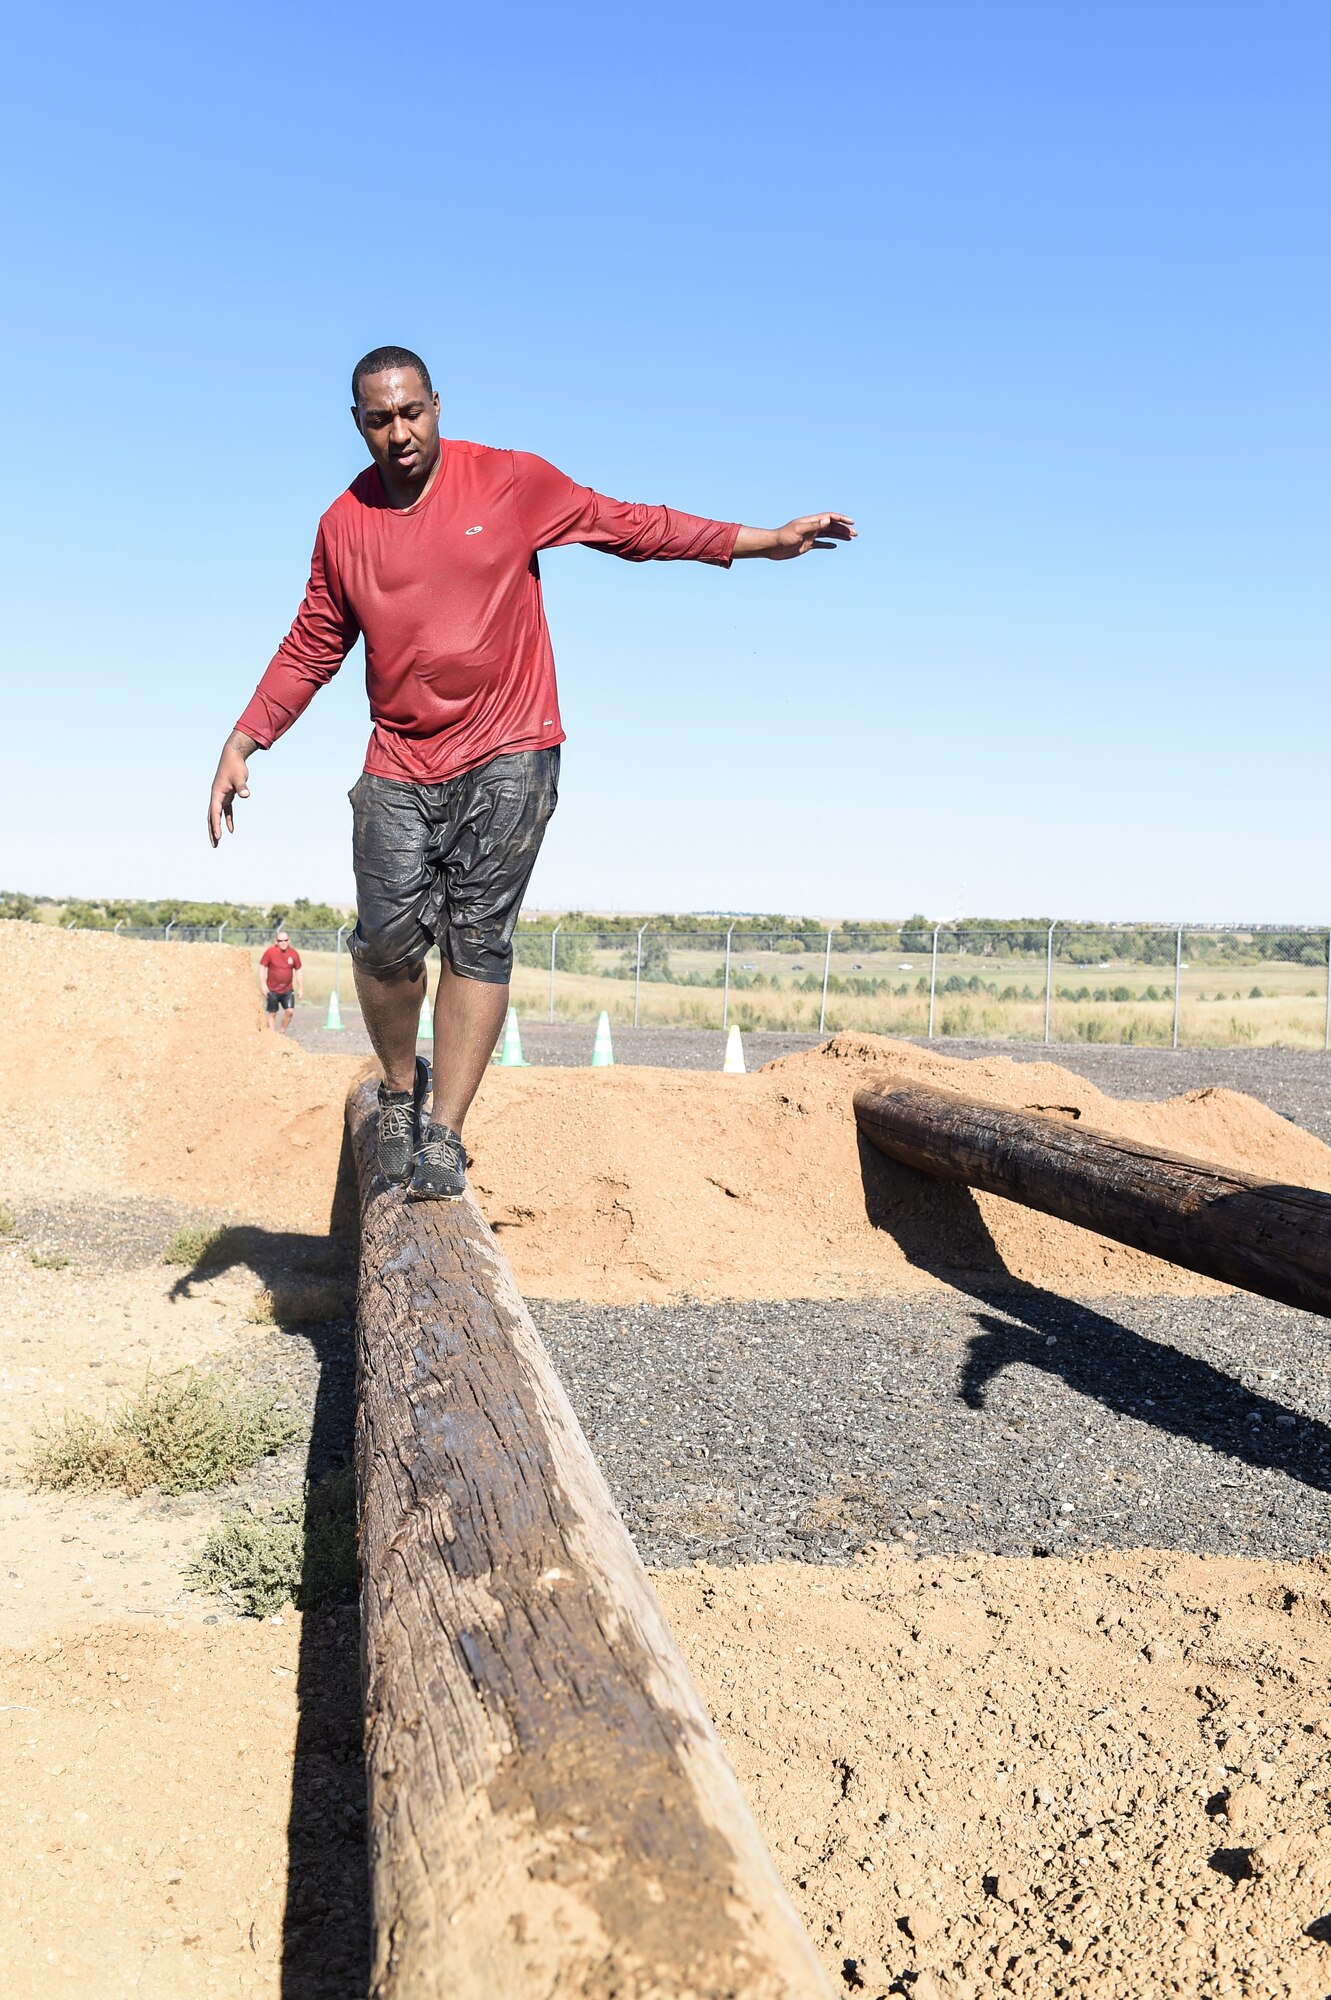 A Team Buckley member makes his way across a wooden beam during WARFIT Sept. 25, 2014, on Buckley Air Force Base, Colo. The 460th Civil Engineer Squadron hosted the September WARFIT, which consisted of a 5K run and a mud obstacle course. WARFIT is a way for the 460th Space Wing and base partner units to get together and stay physically fit. (U.S. Air Force photo by Senior Airman Phillip Houk/Released)